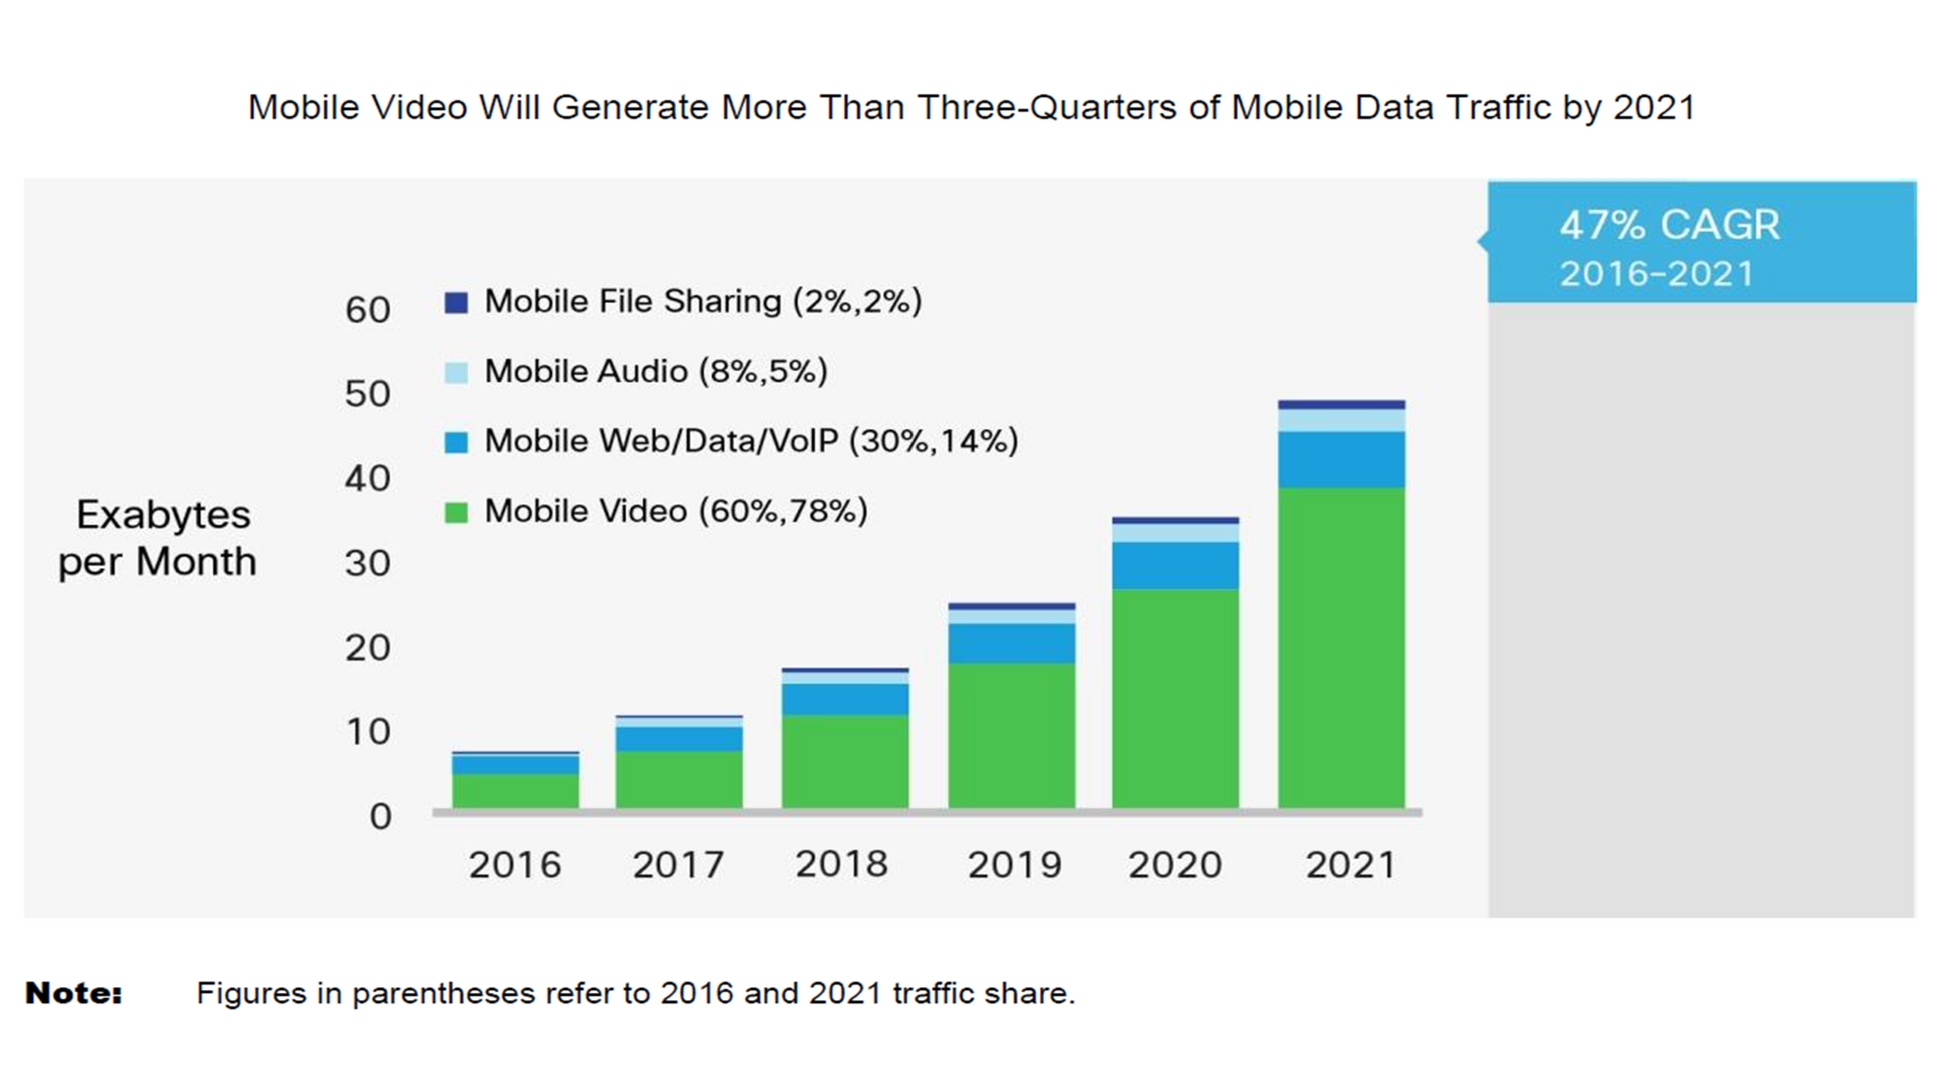 Mobile Video Consumption Will Rise